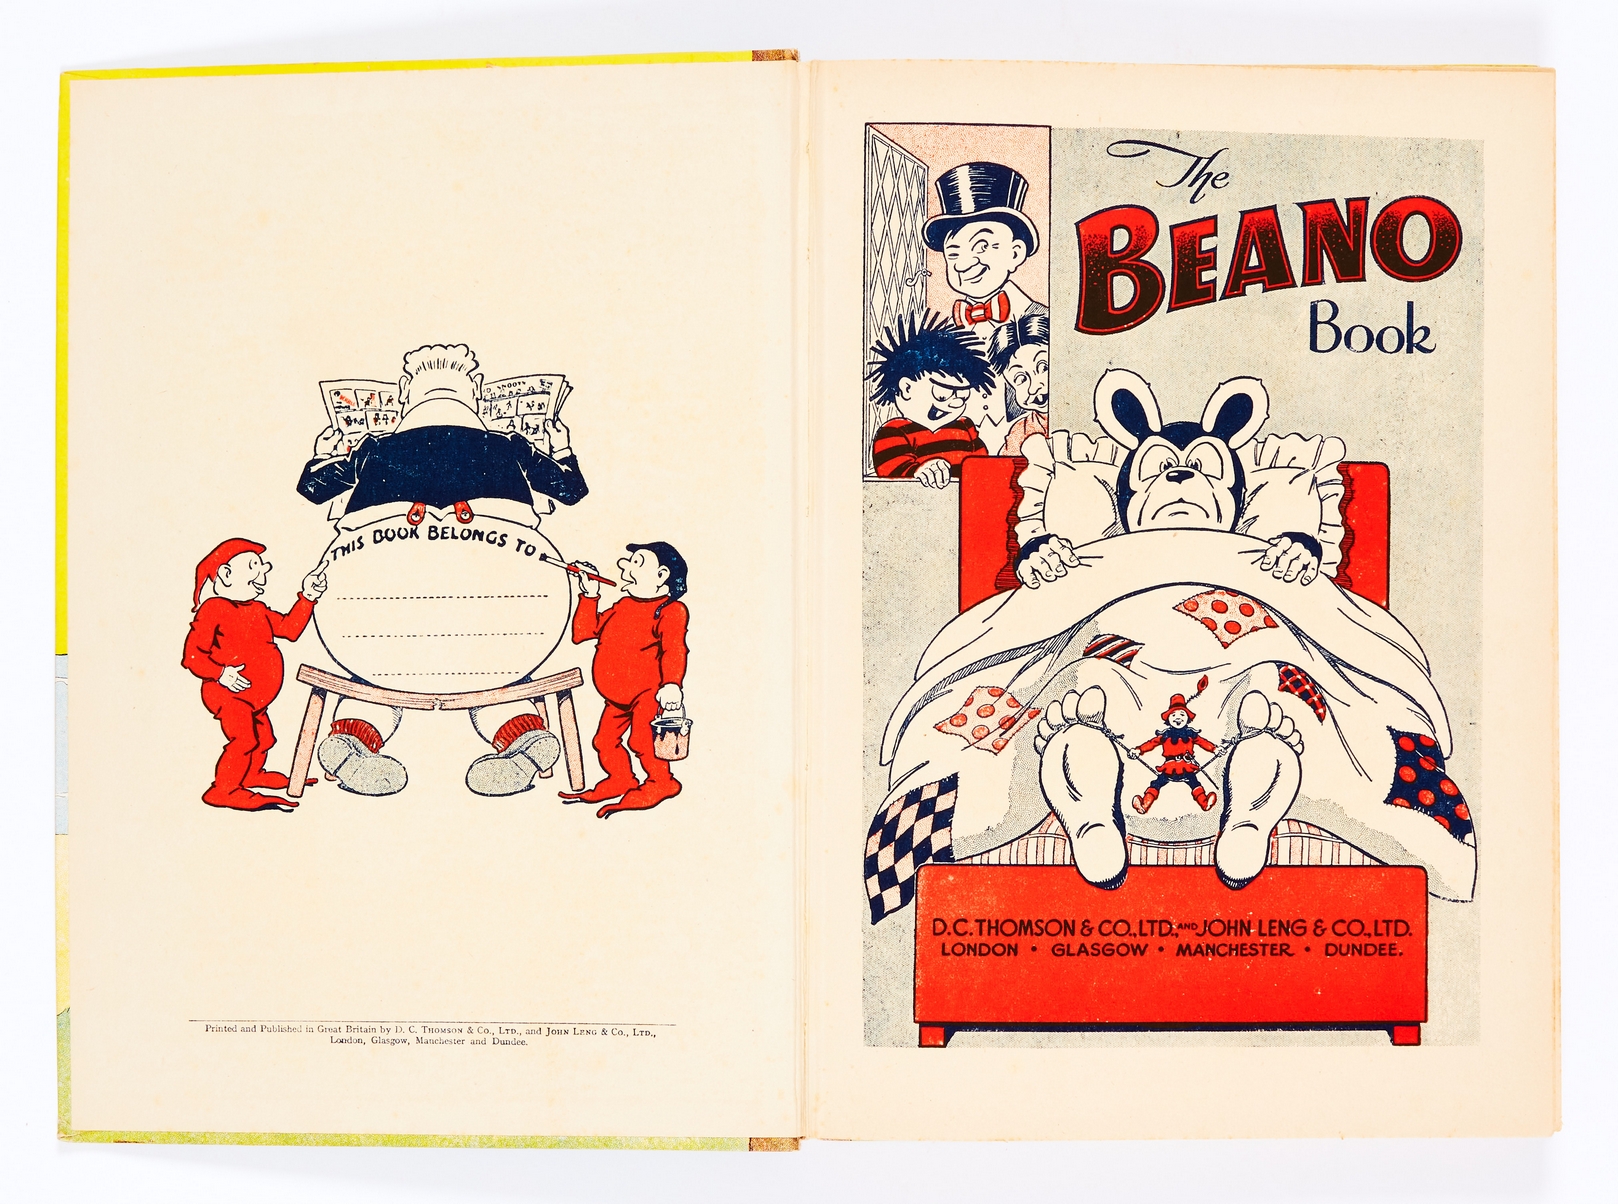 Beano book (1954). Biffo nipped in the bod! Bright cover and spine with minimal wear. No dedication. - Image 2 of 2